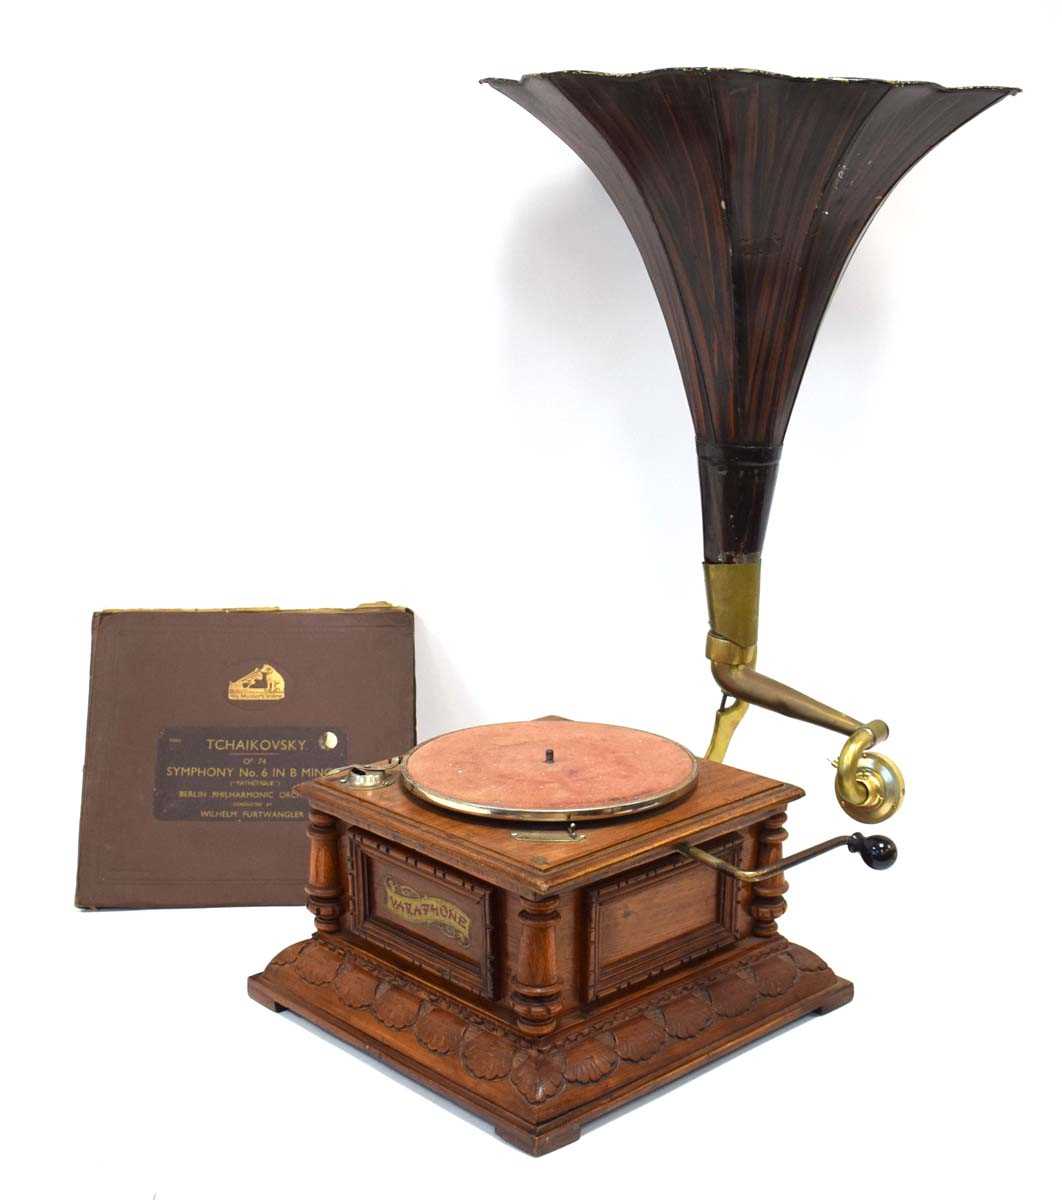 A Varaphone gramophone in a carved walnut case with pressed tin horn, together with a copy of